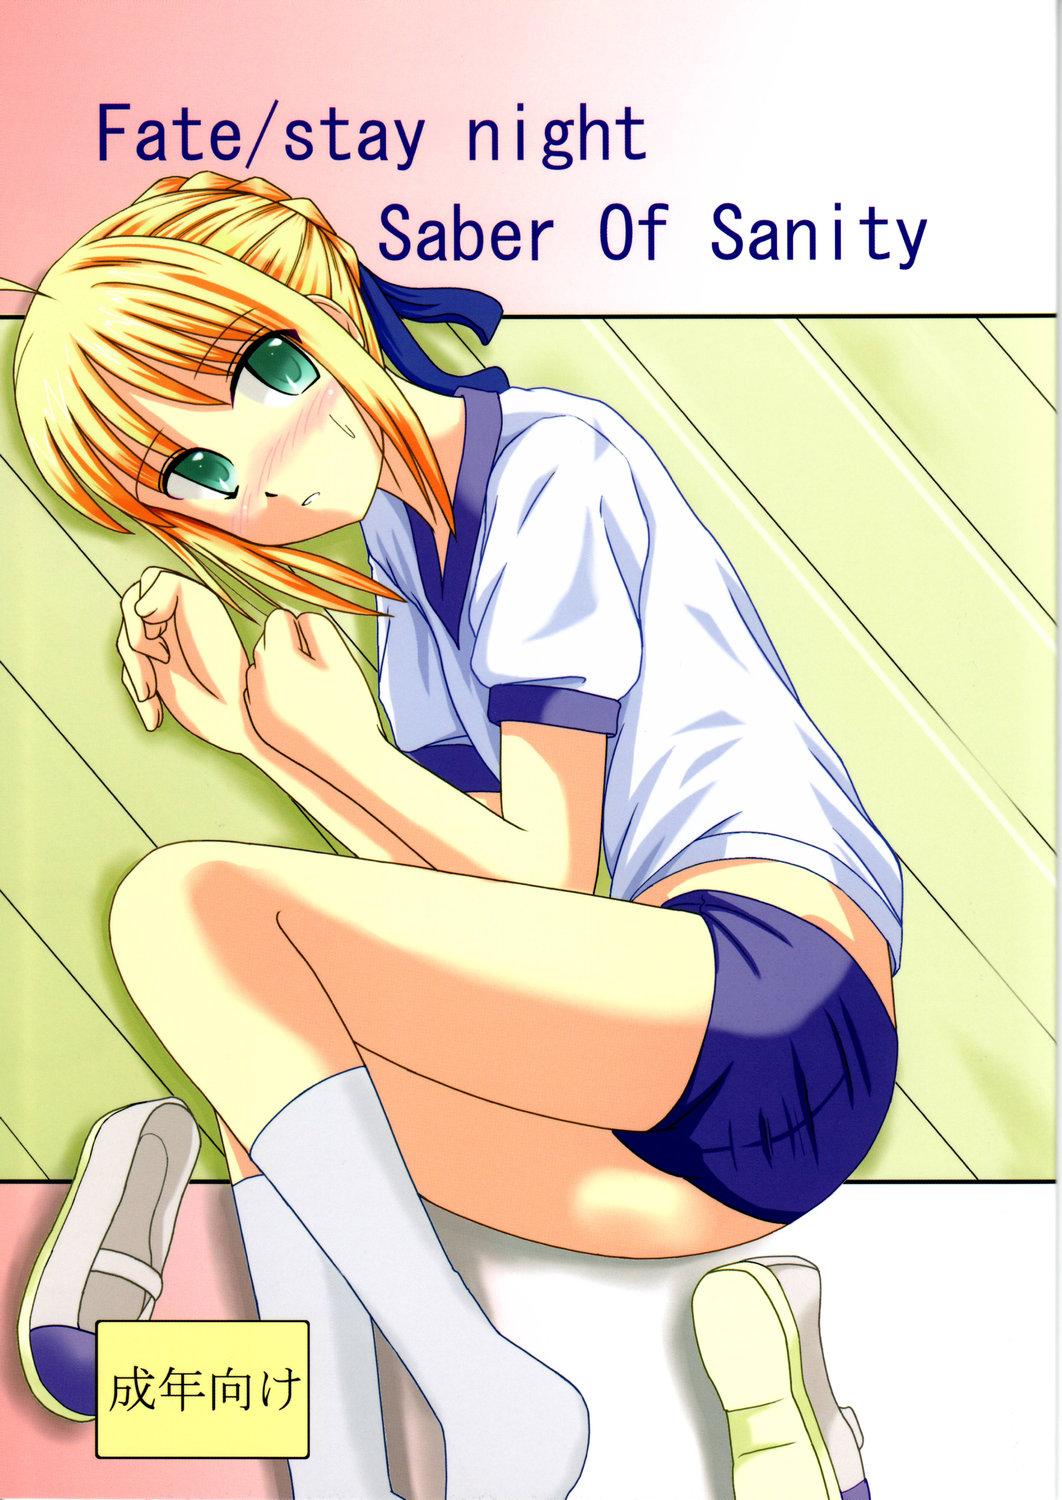 Free Amature Porn Saber Of Sanity - Fate stay night Hiddencam - Page 1